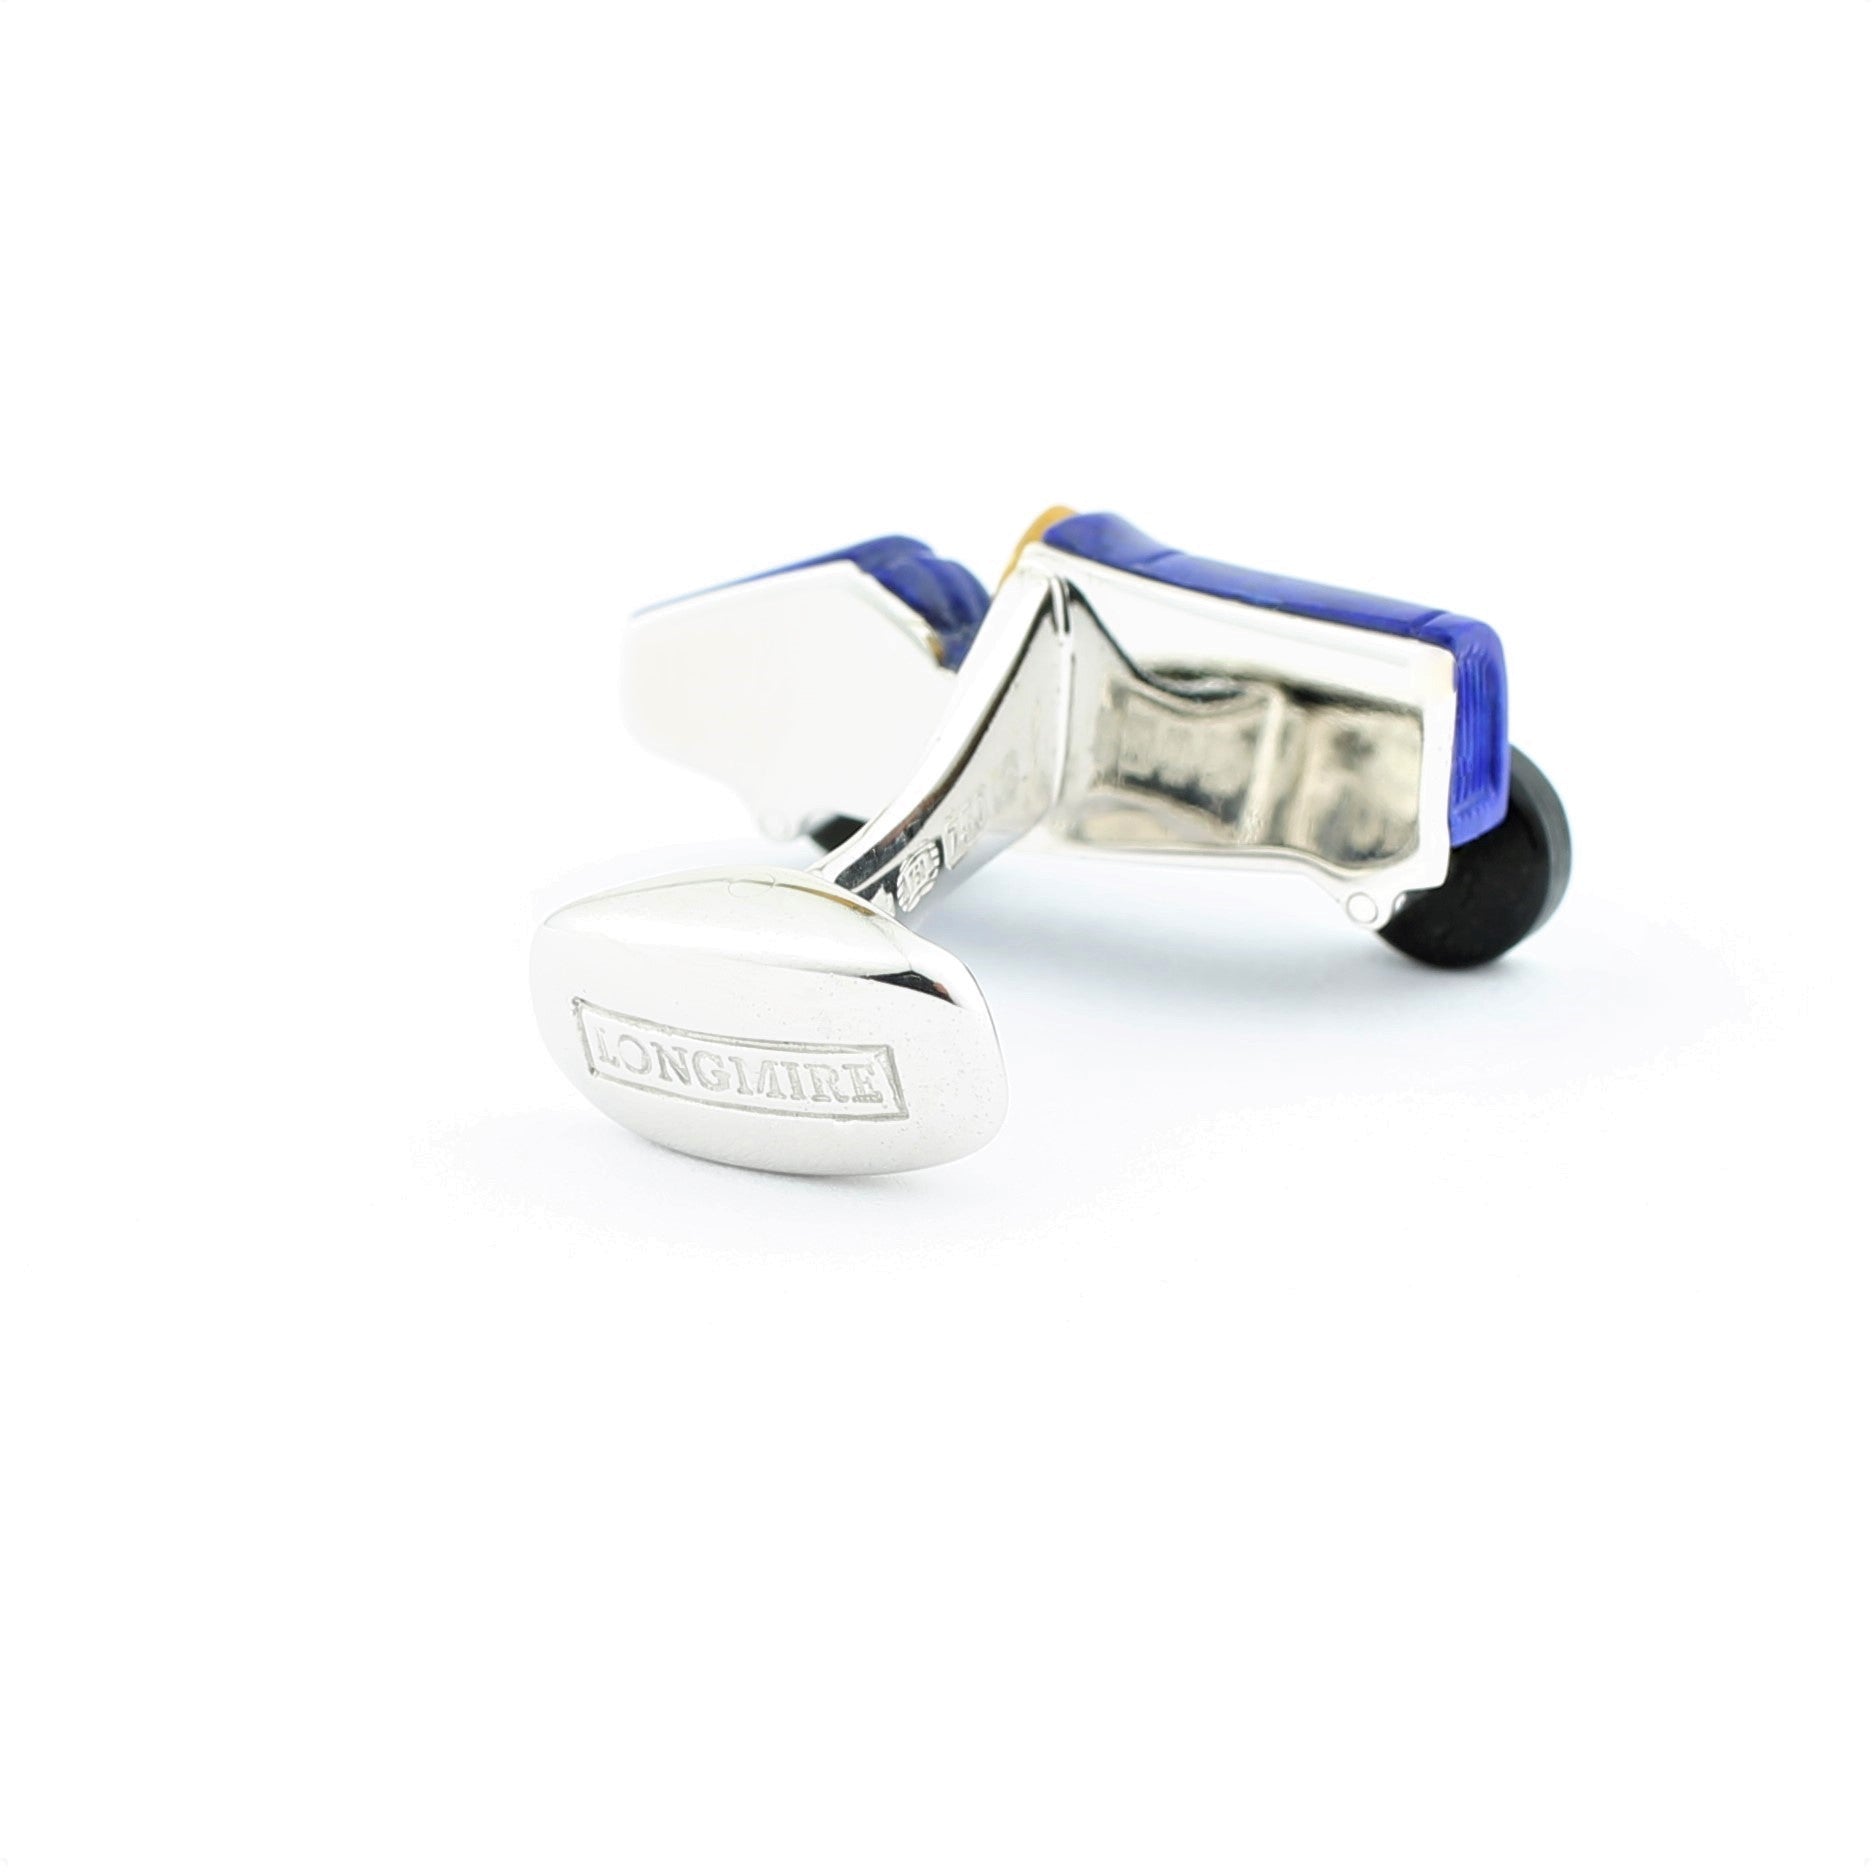 Vintage car cufflinks in lapis onyx and 18k white gold - rear